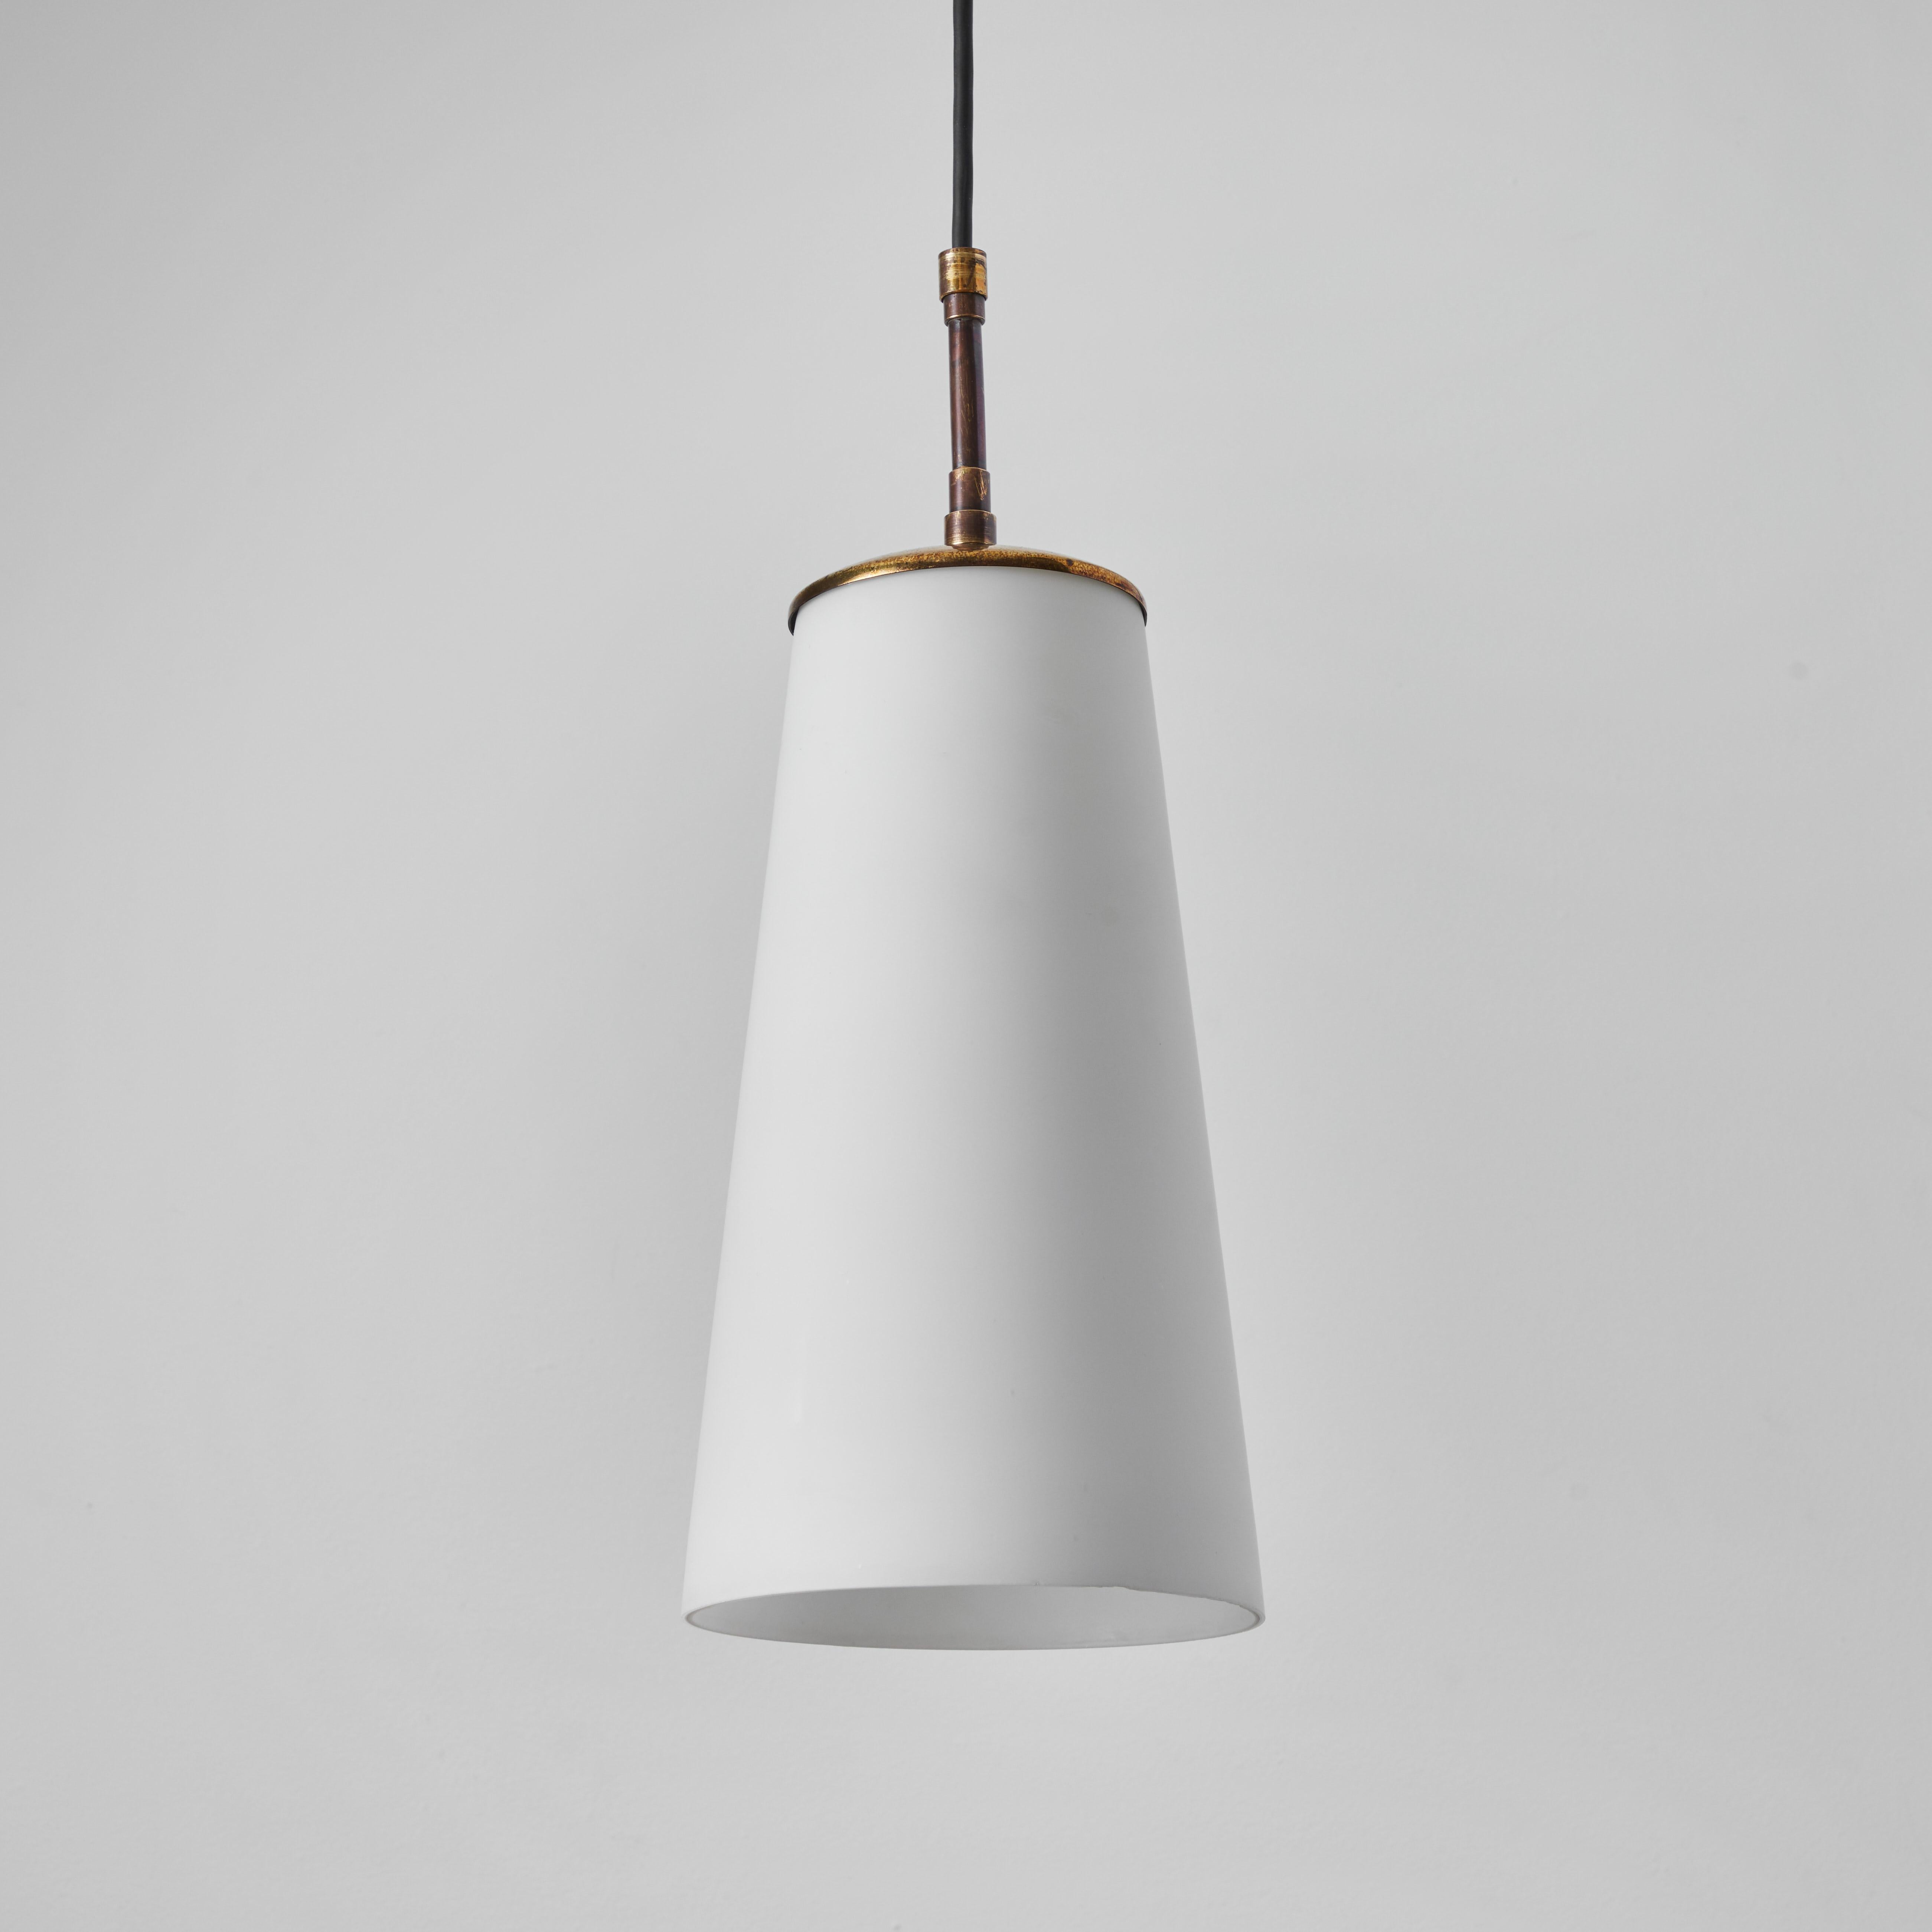 1950s Brass and Opaline Glass Pendant Lamp Attributed to Stilnovo For Sale 3